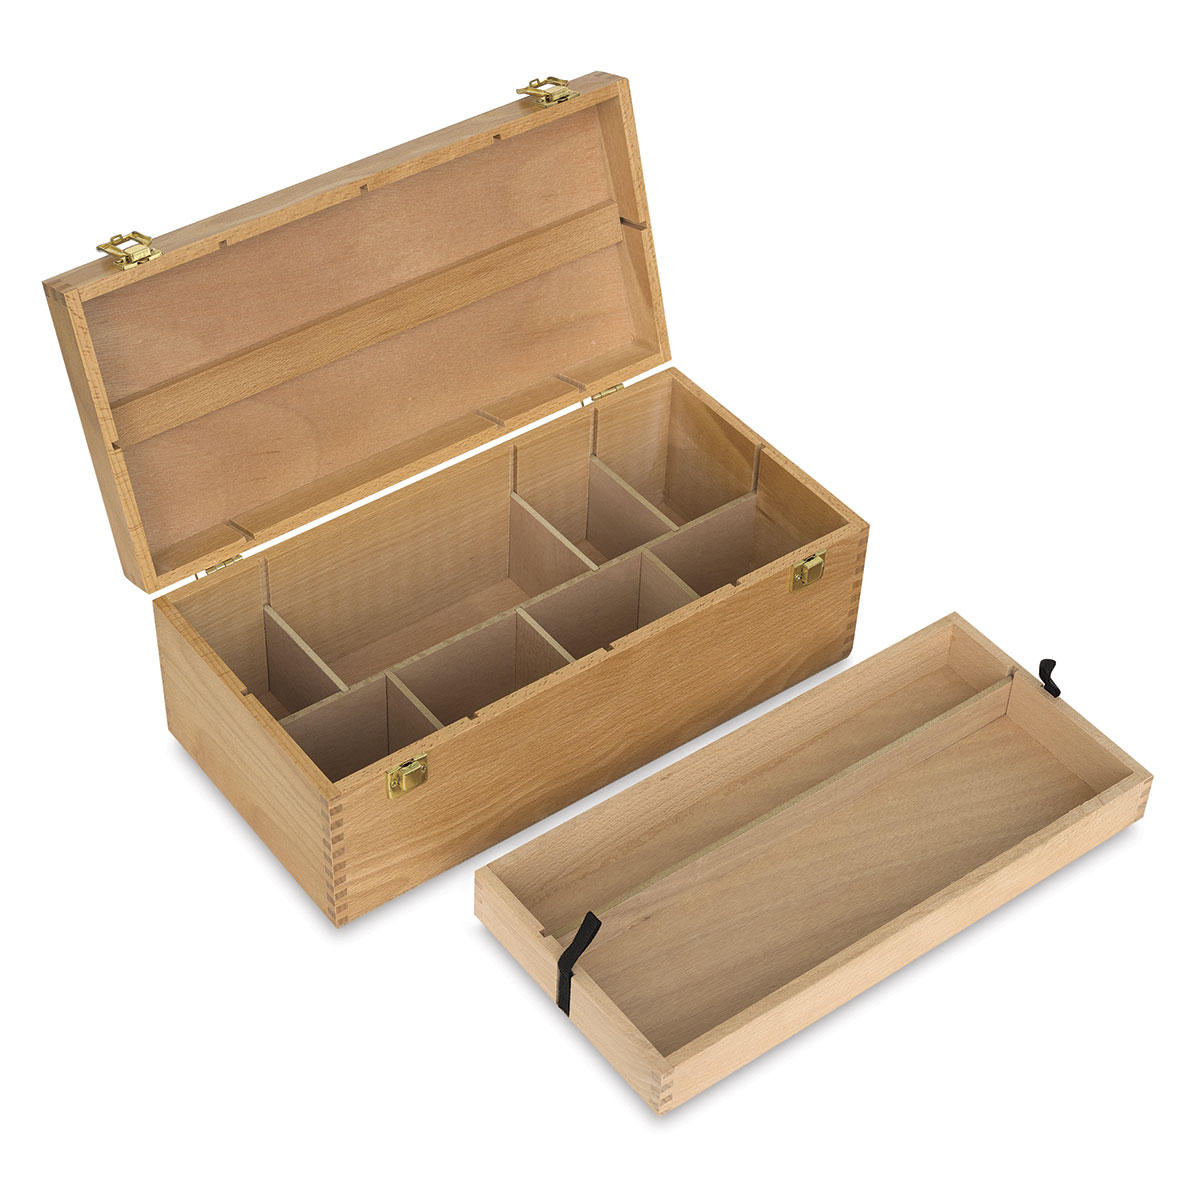 Storage Boxes and Containers